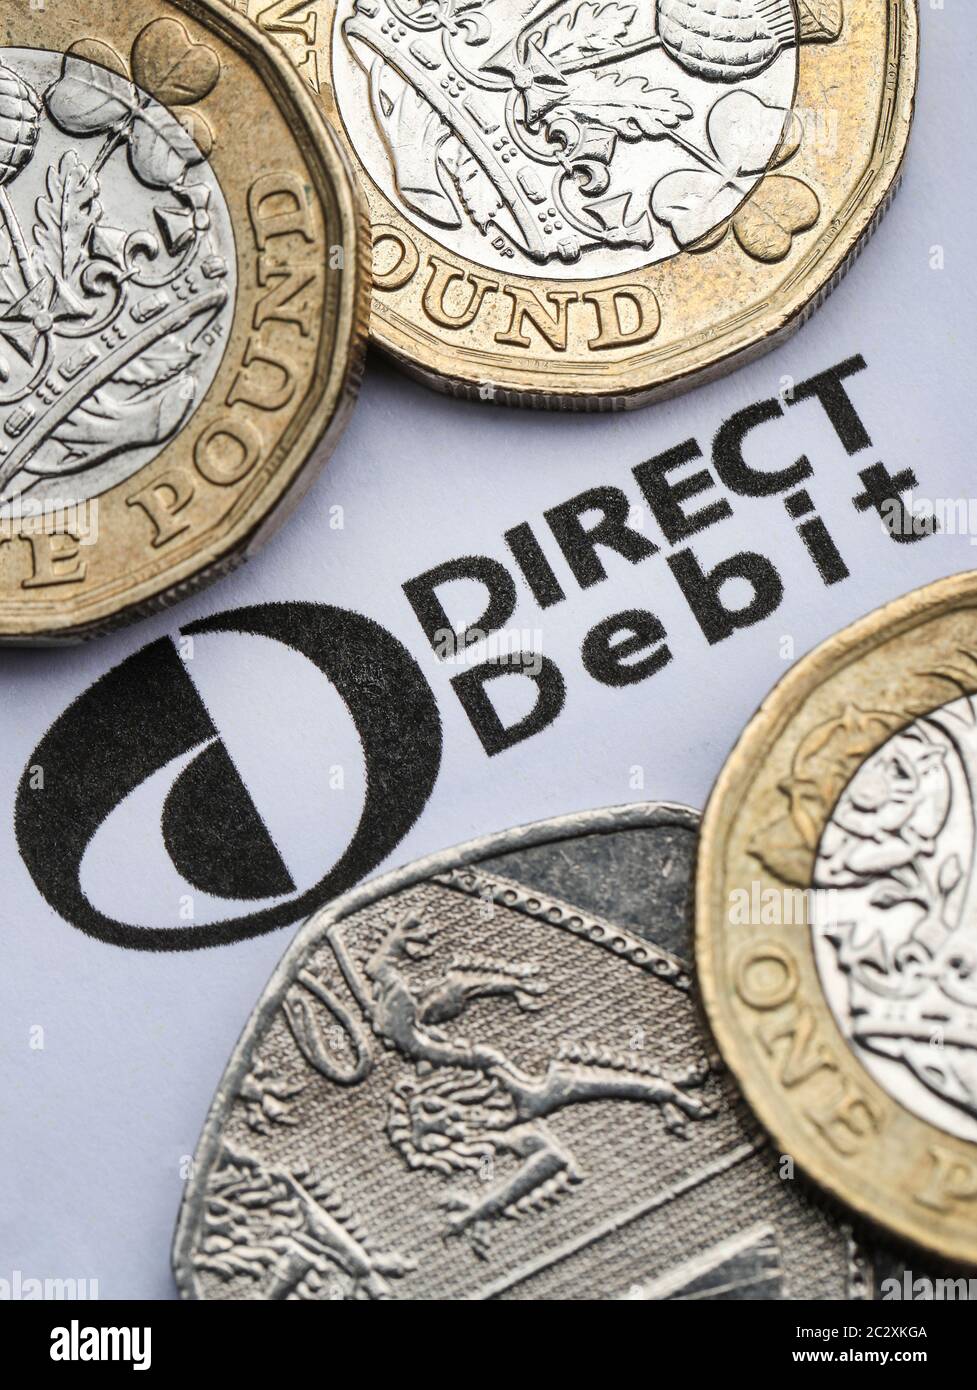 Direct Debit form with UK currency. Many people pay their gas and electric energy bills in the UK via Direct Debit. Stock Photo